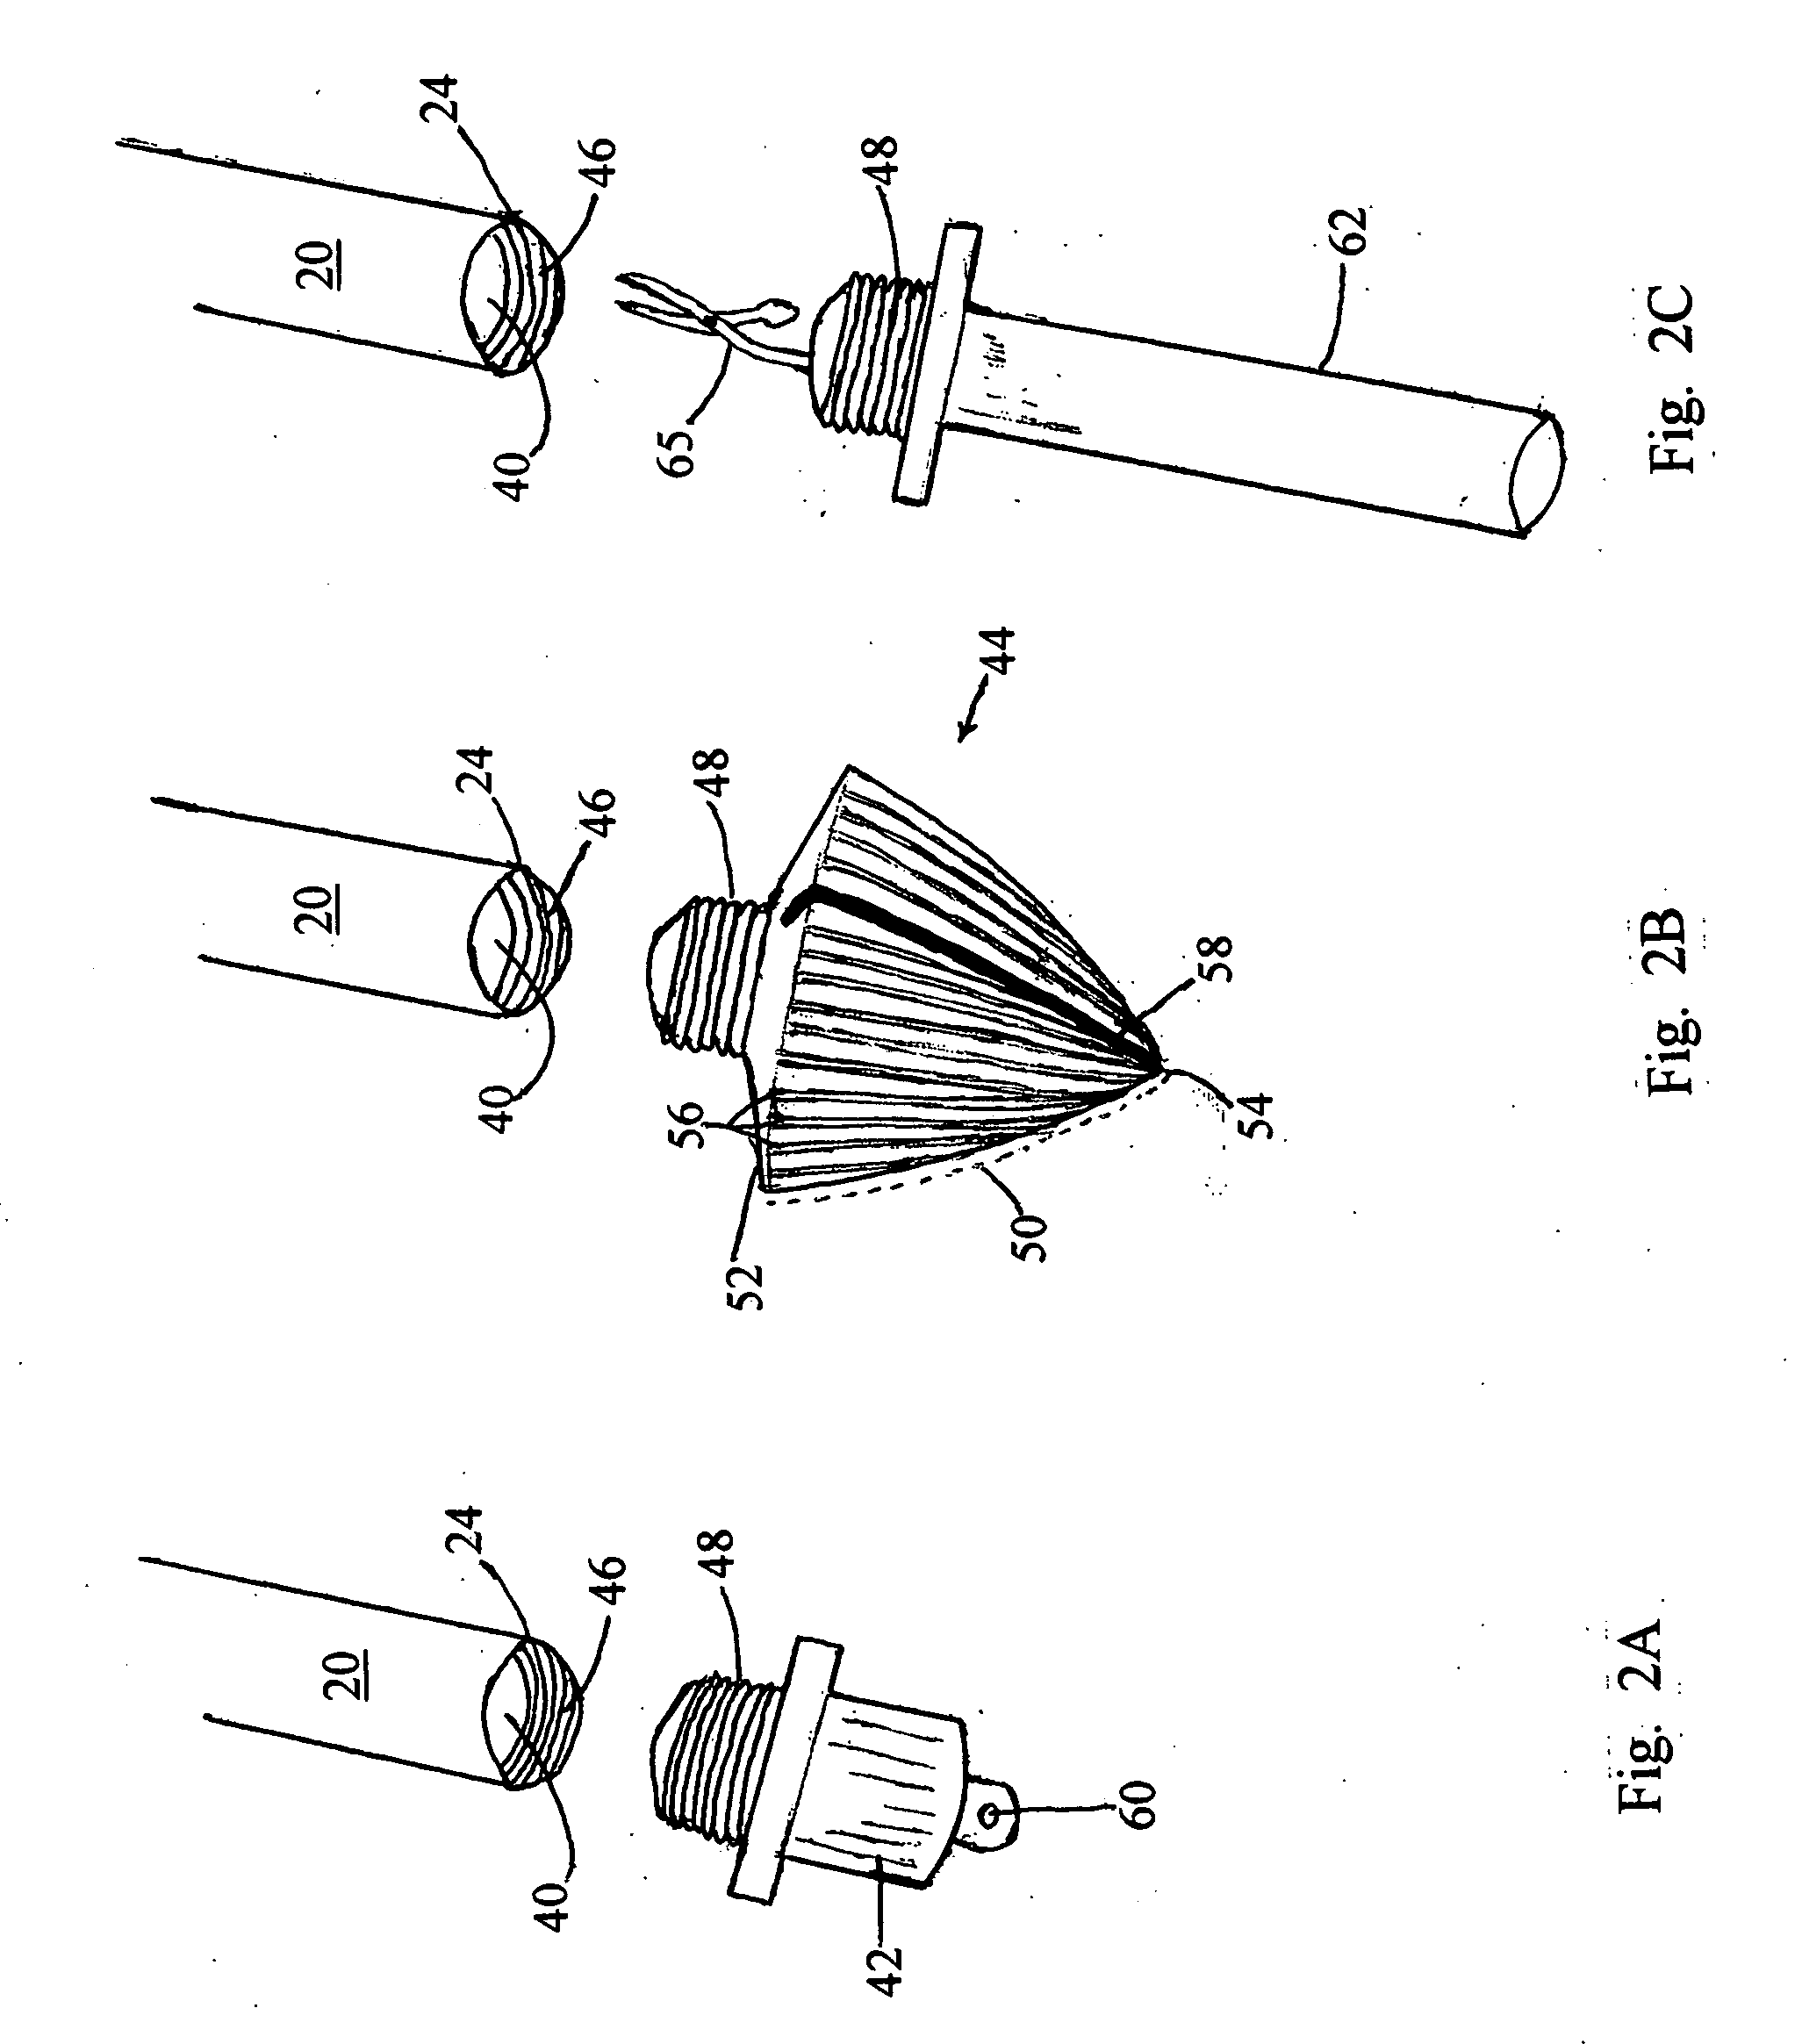 Apparatus for tying fishing line to fishing tackle and methods for use